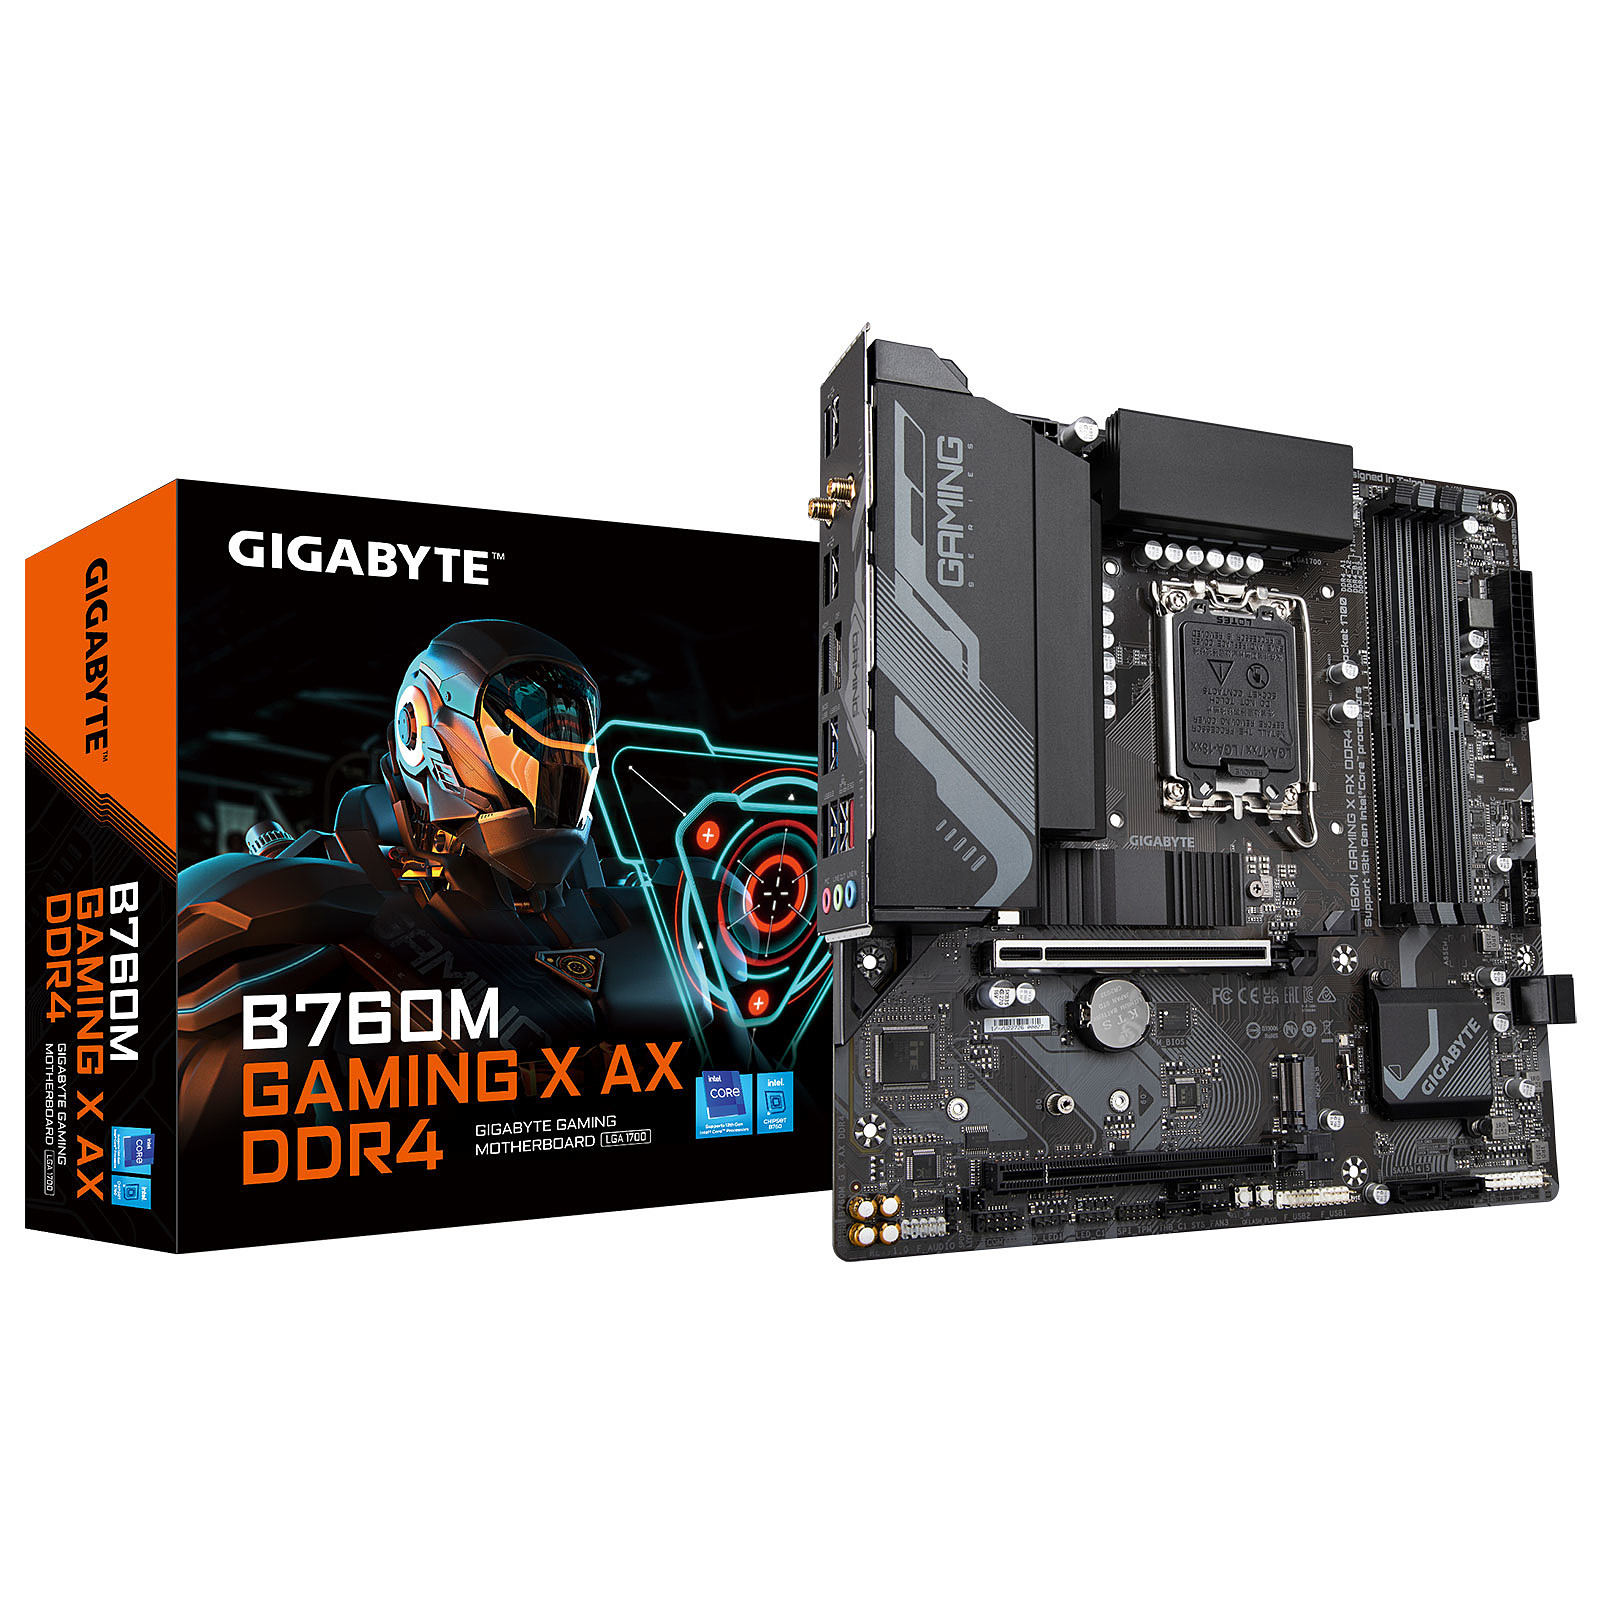 DDR5-7600 performance with GIGABYTE B760 motherboards